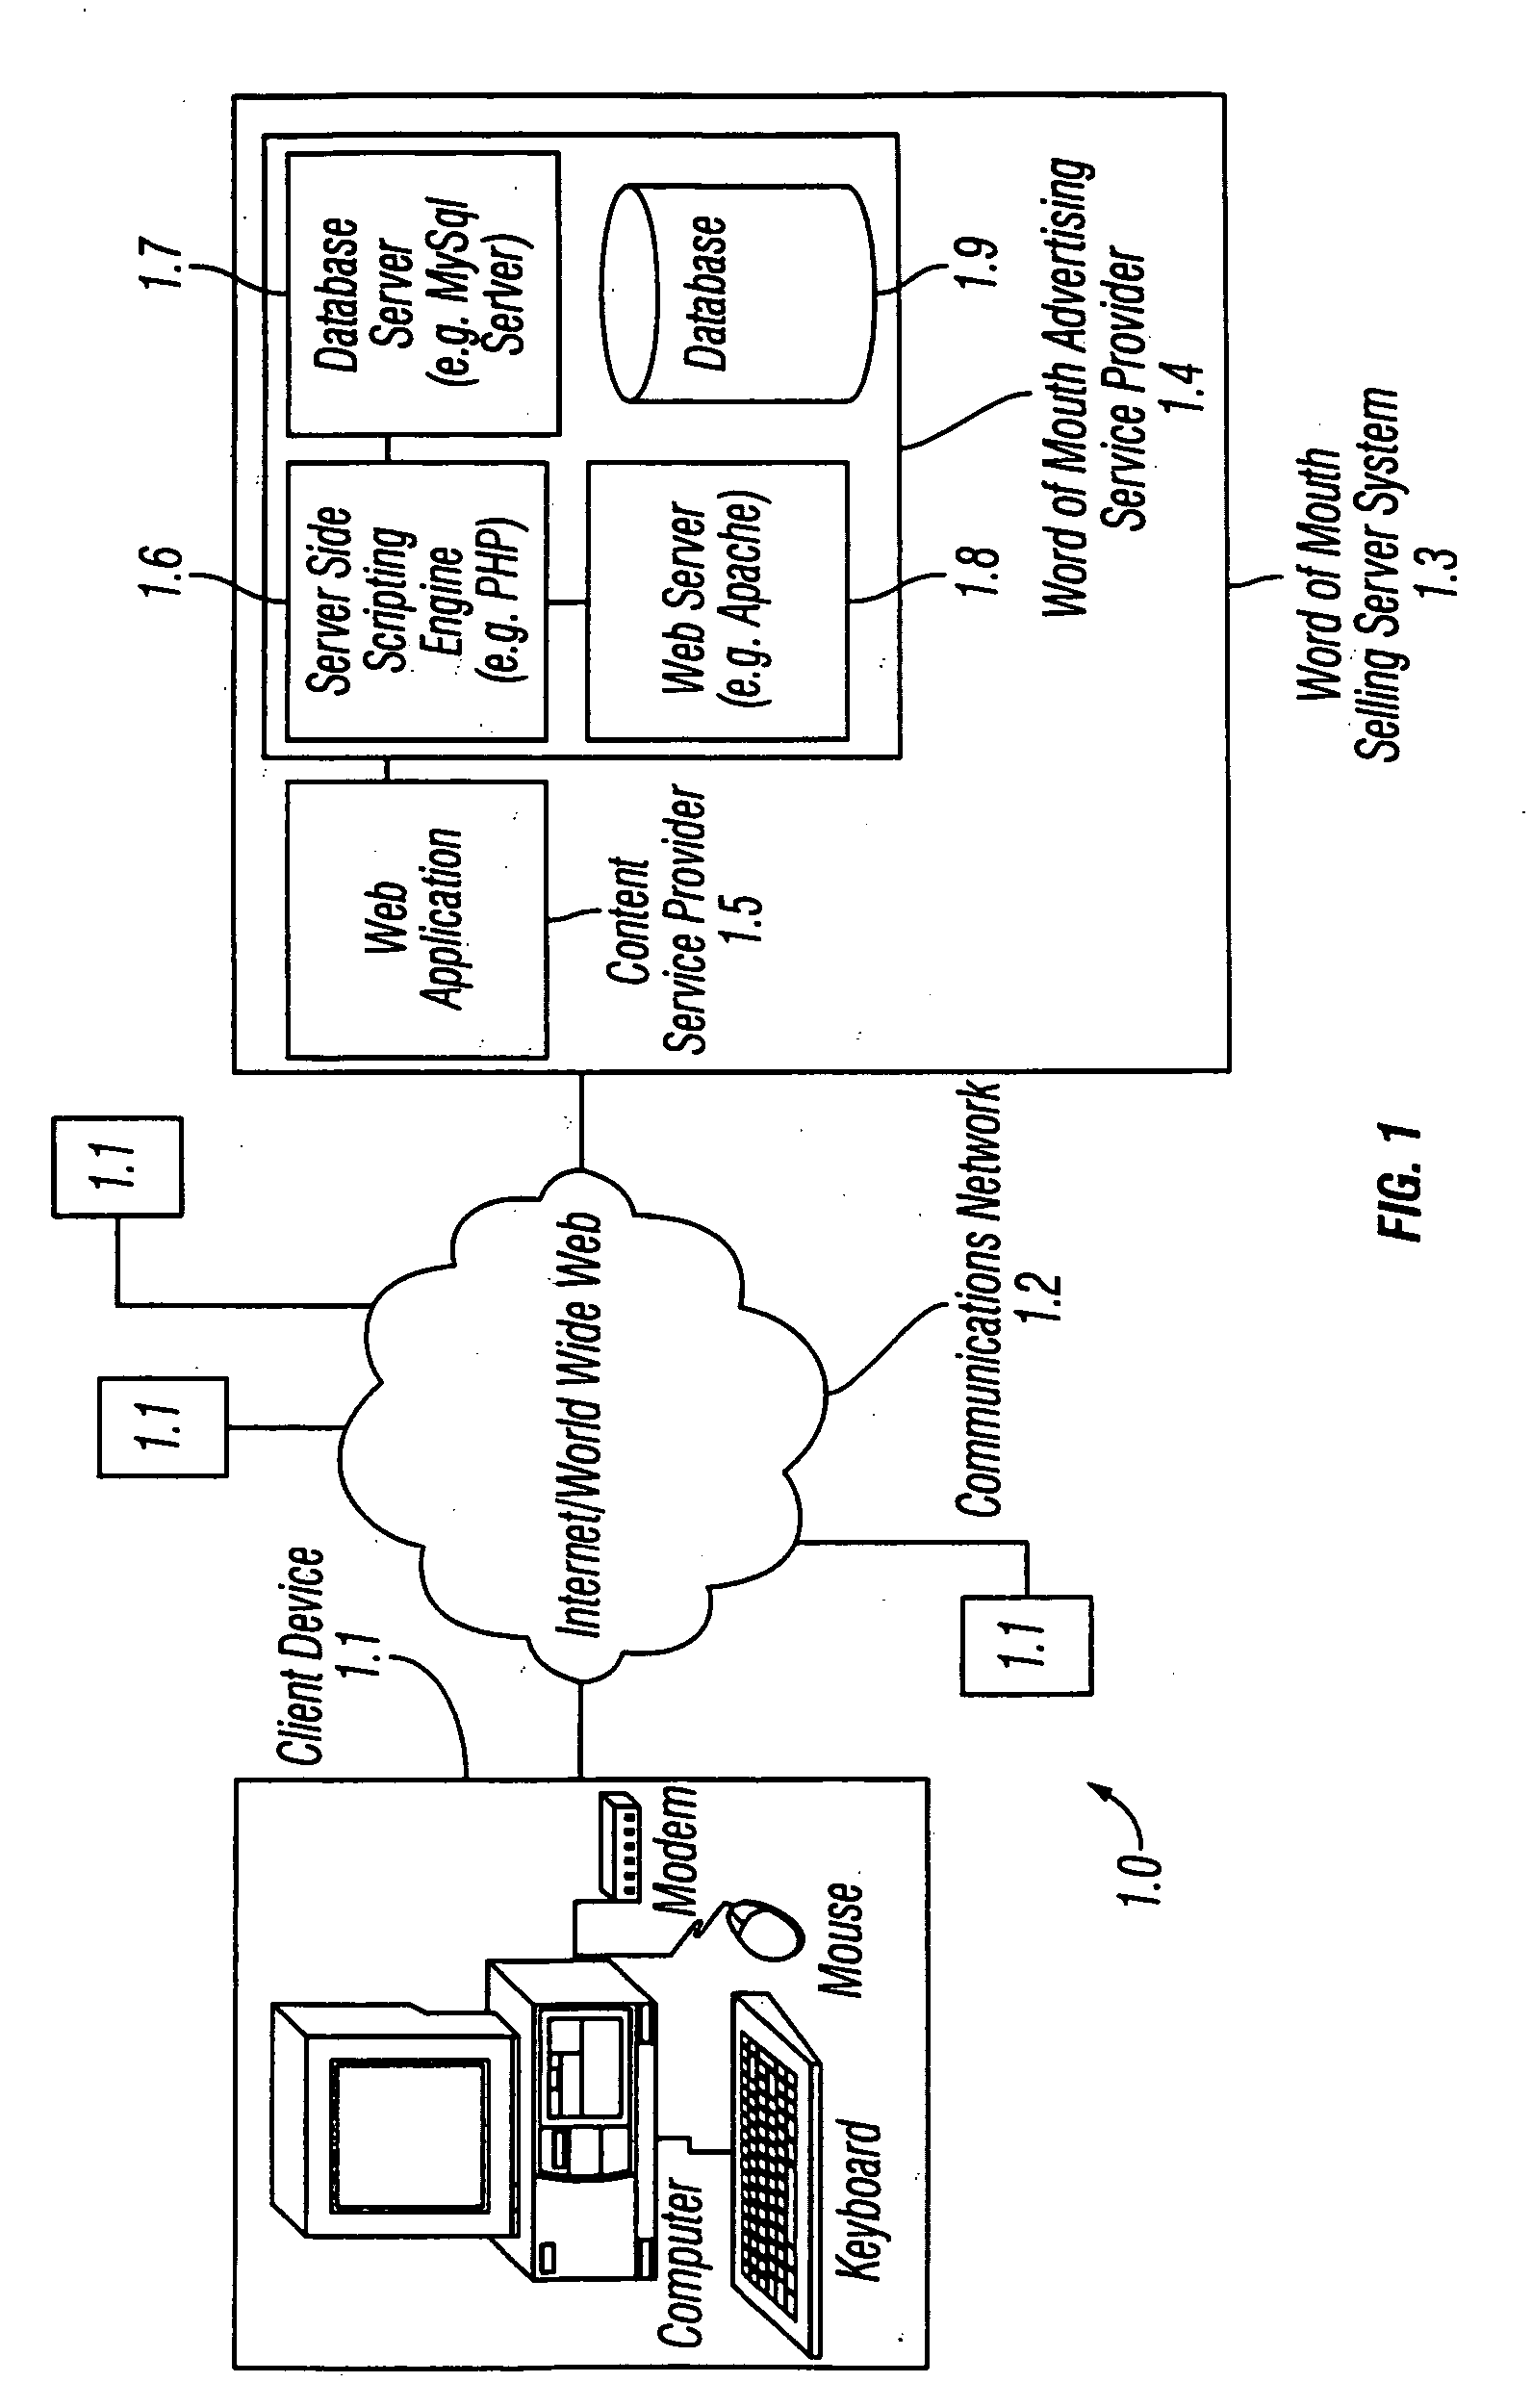 Method and apparatus for word of mouth selling via a communications network